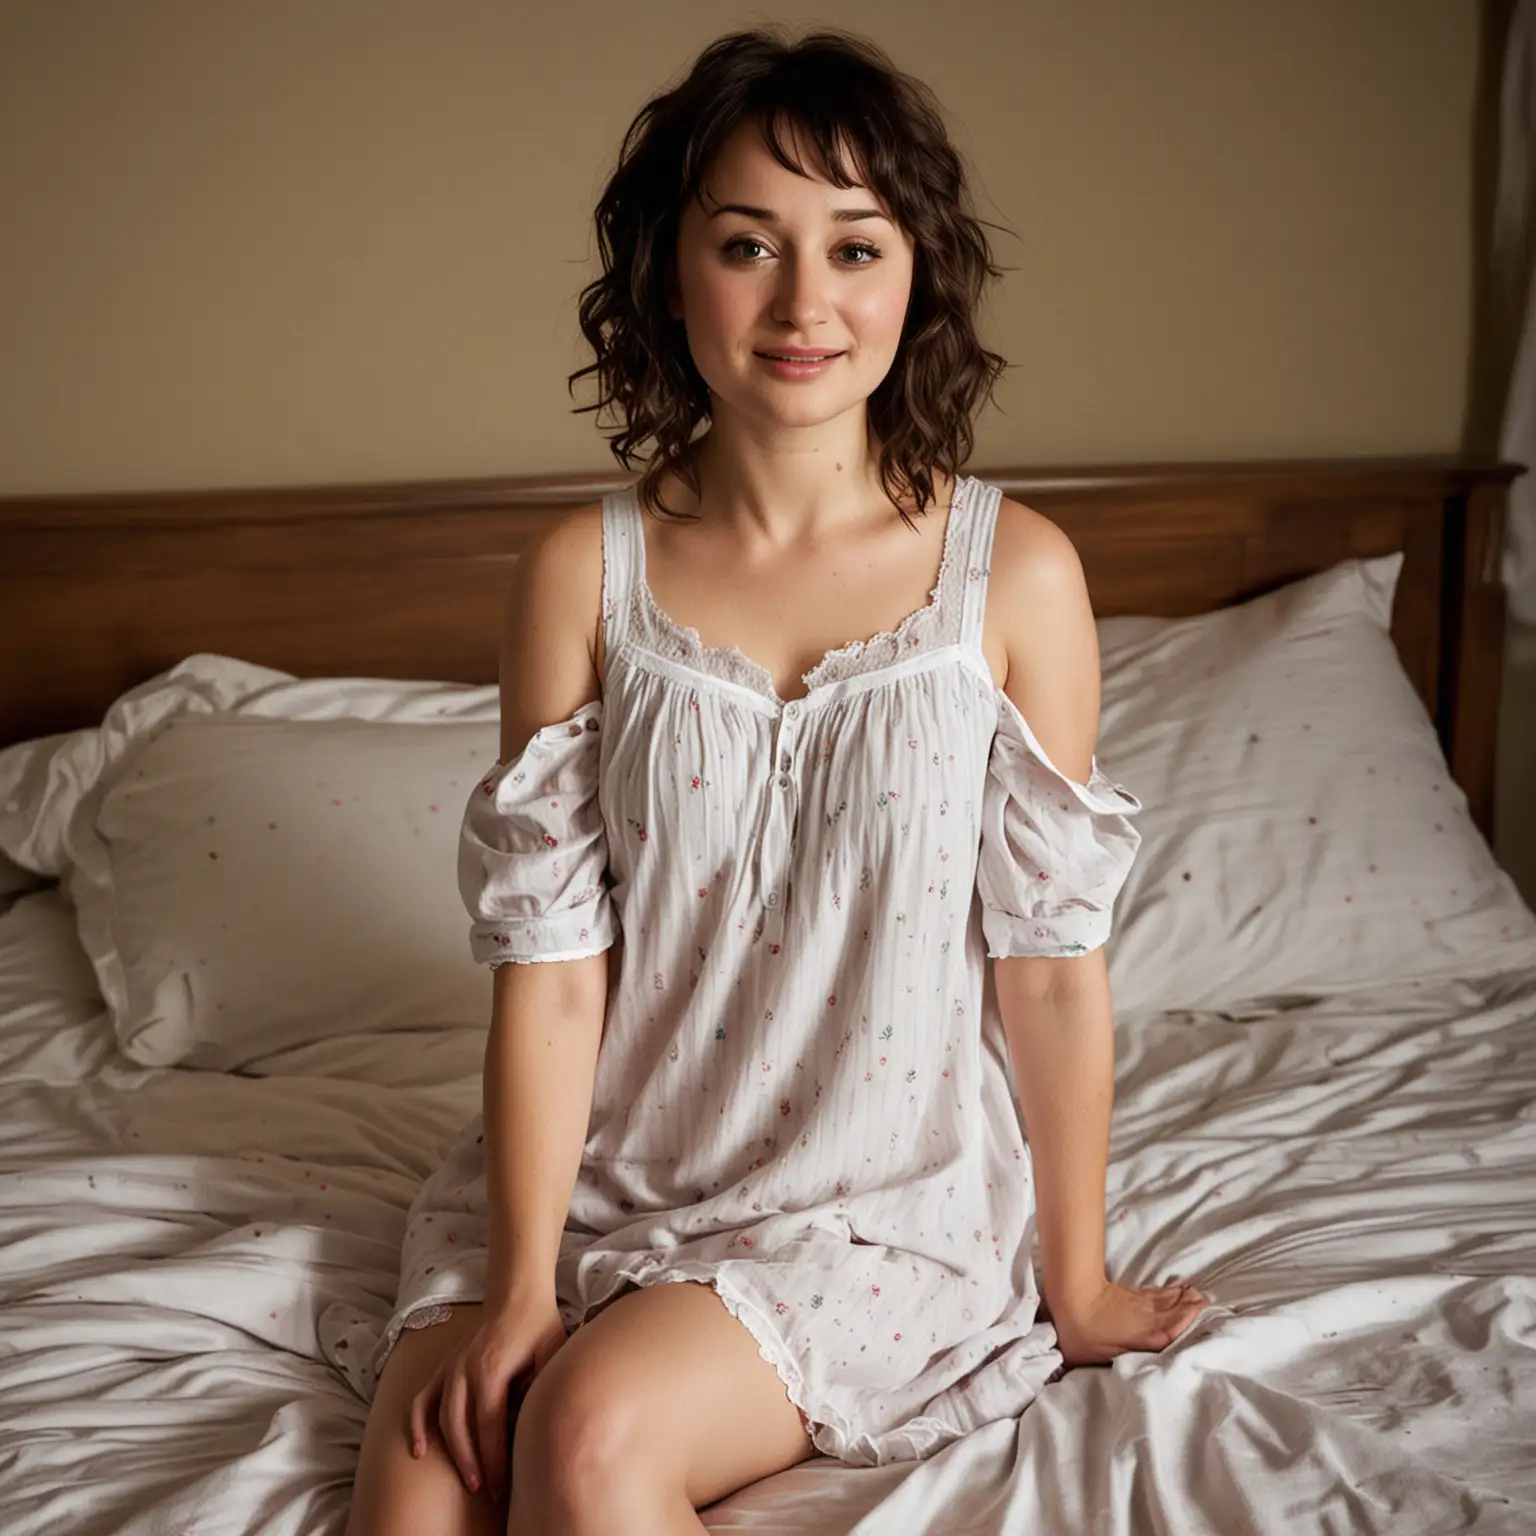 actress Milana vayntrub wearing a nightie on a small bed, with light injure on the face